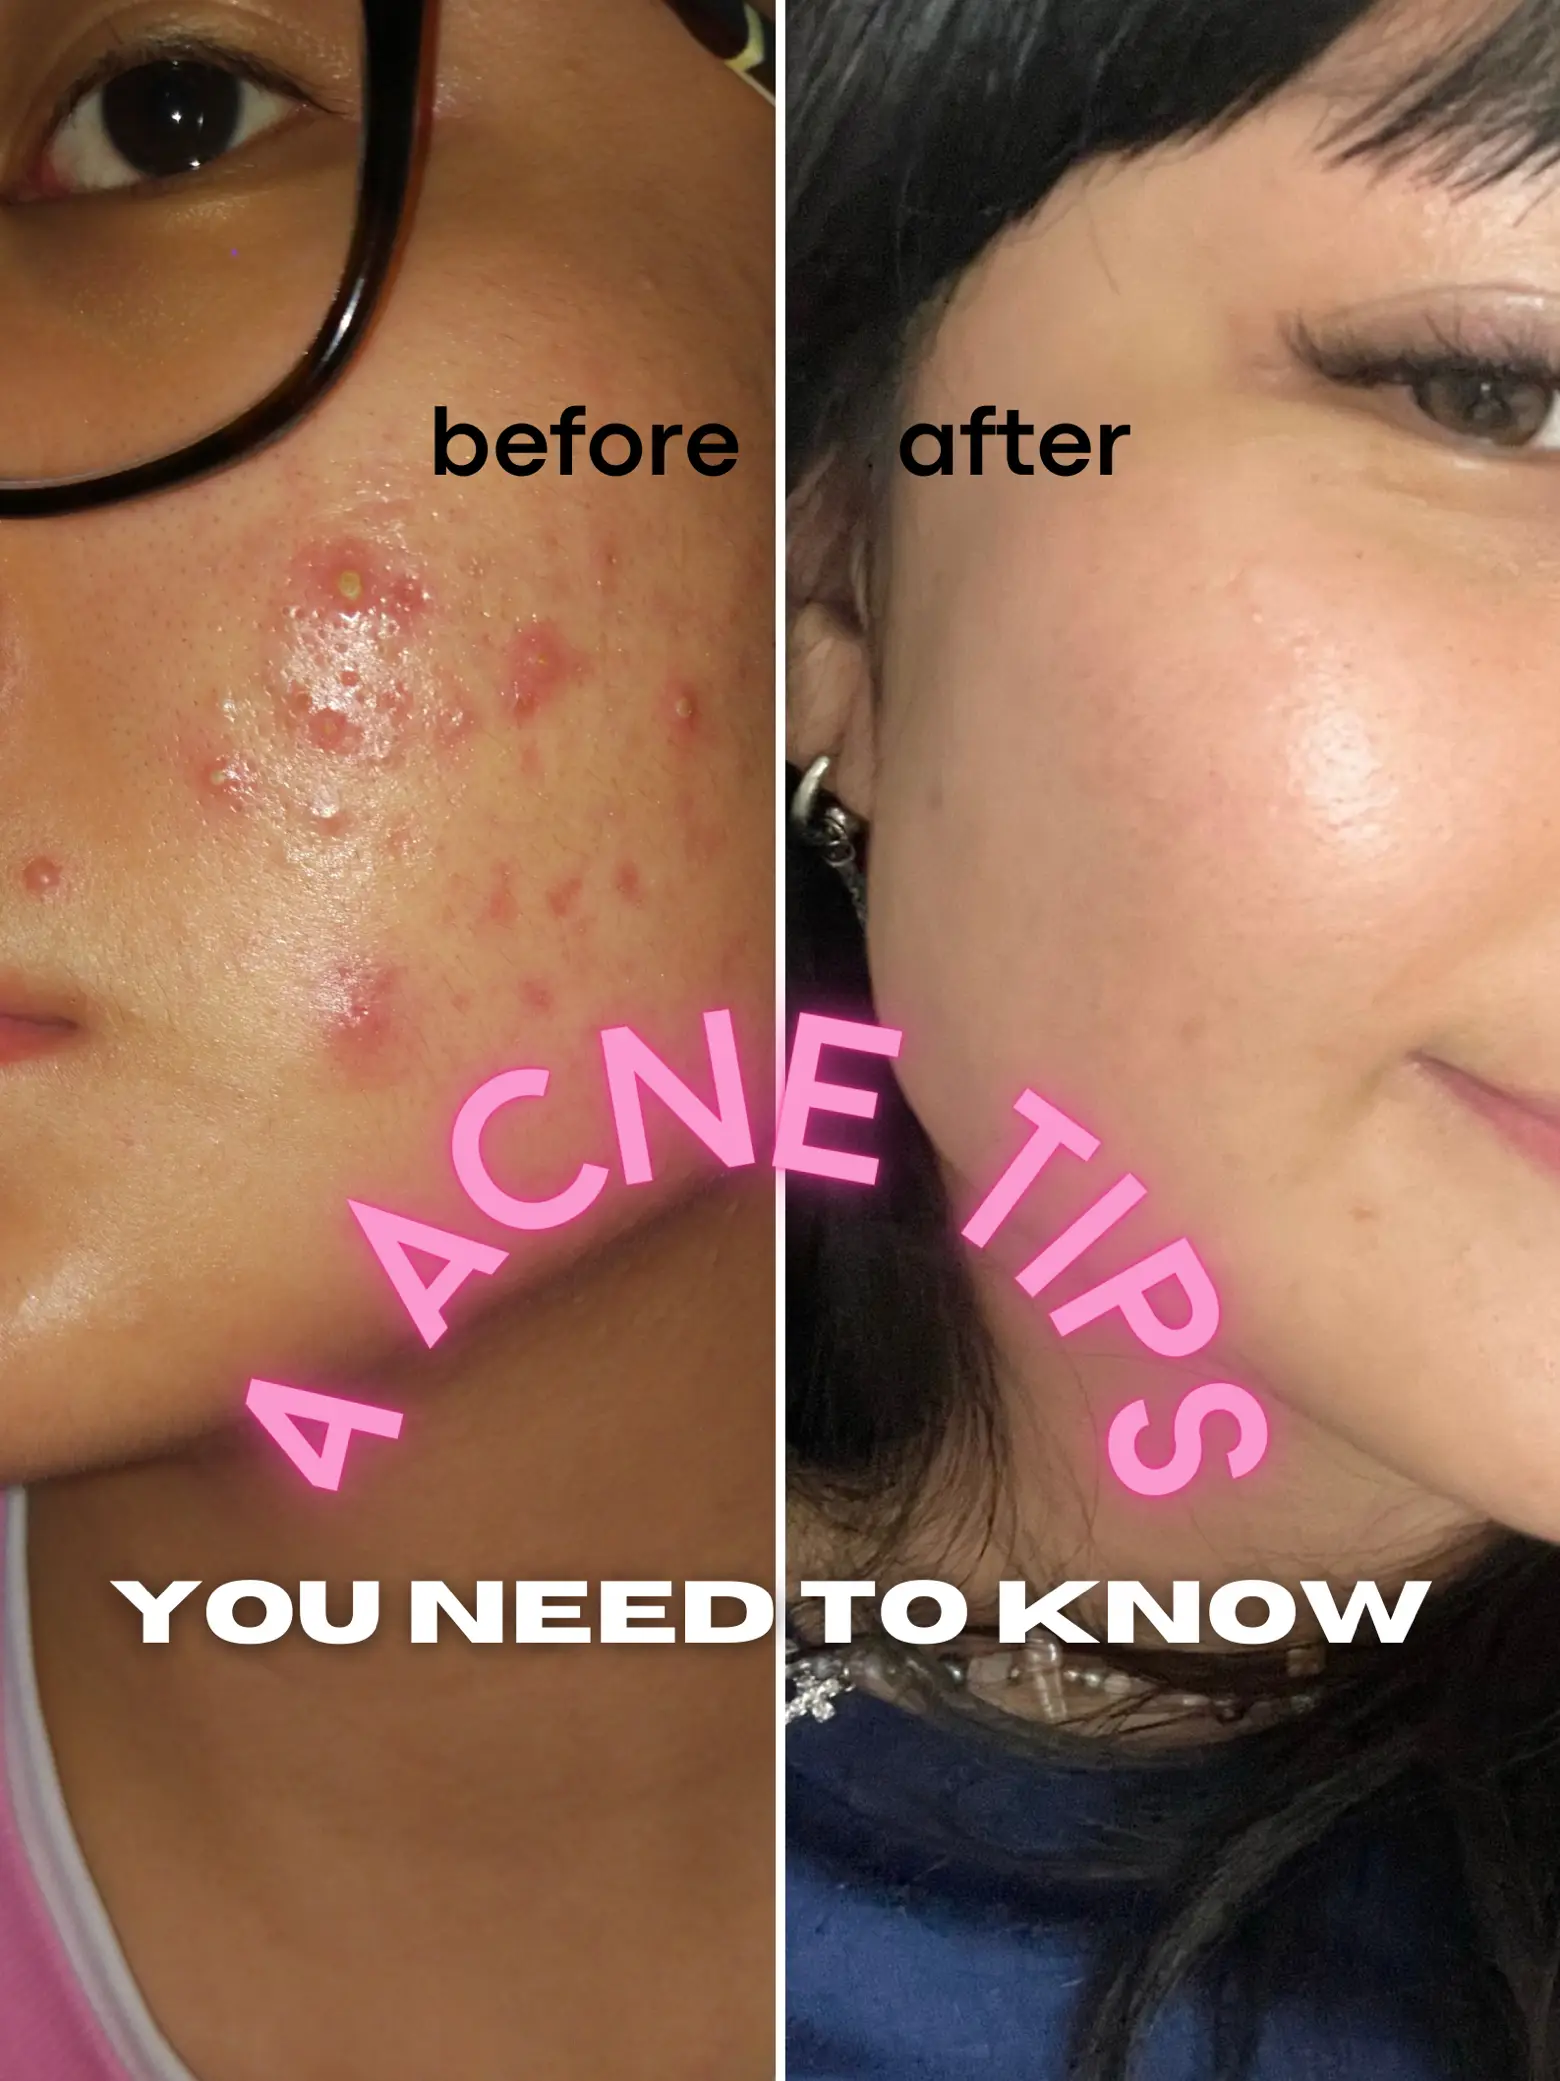 this is why you still have ACNE 😤's images